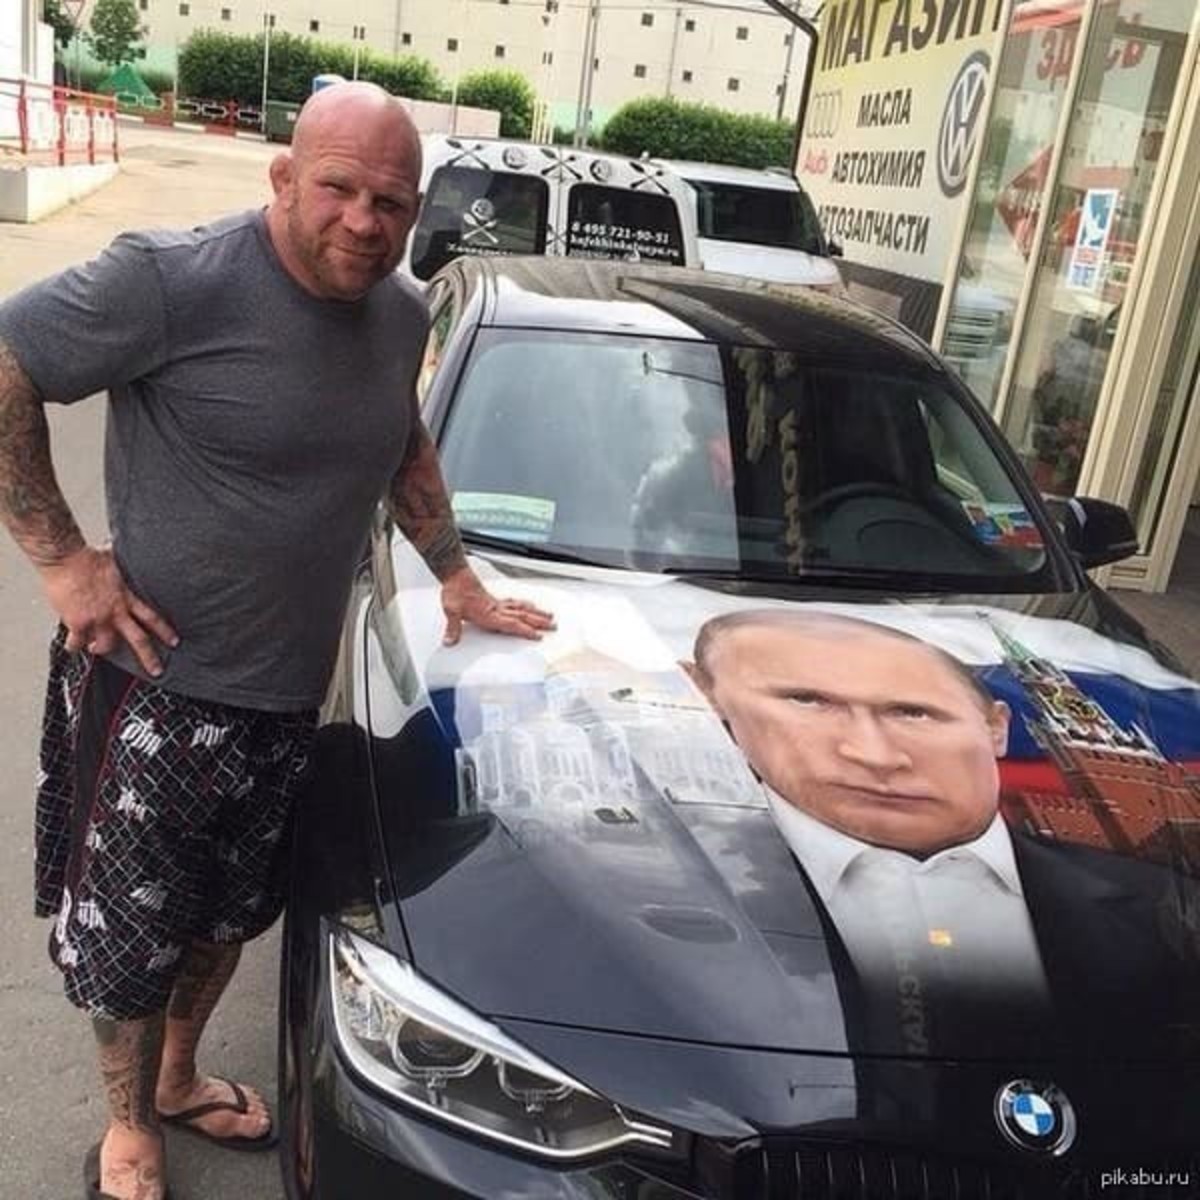 Jeff Monson in a police standoff xpost from rHumanPorn  rMMA